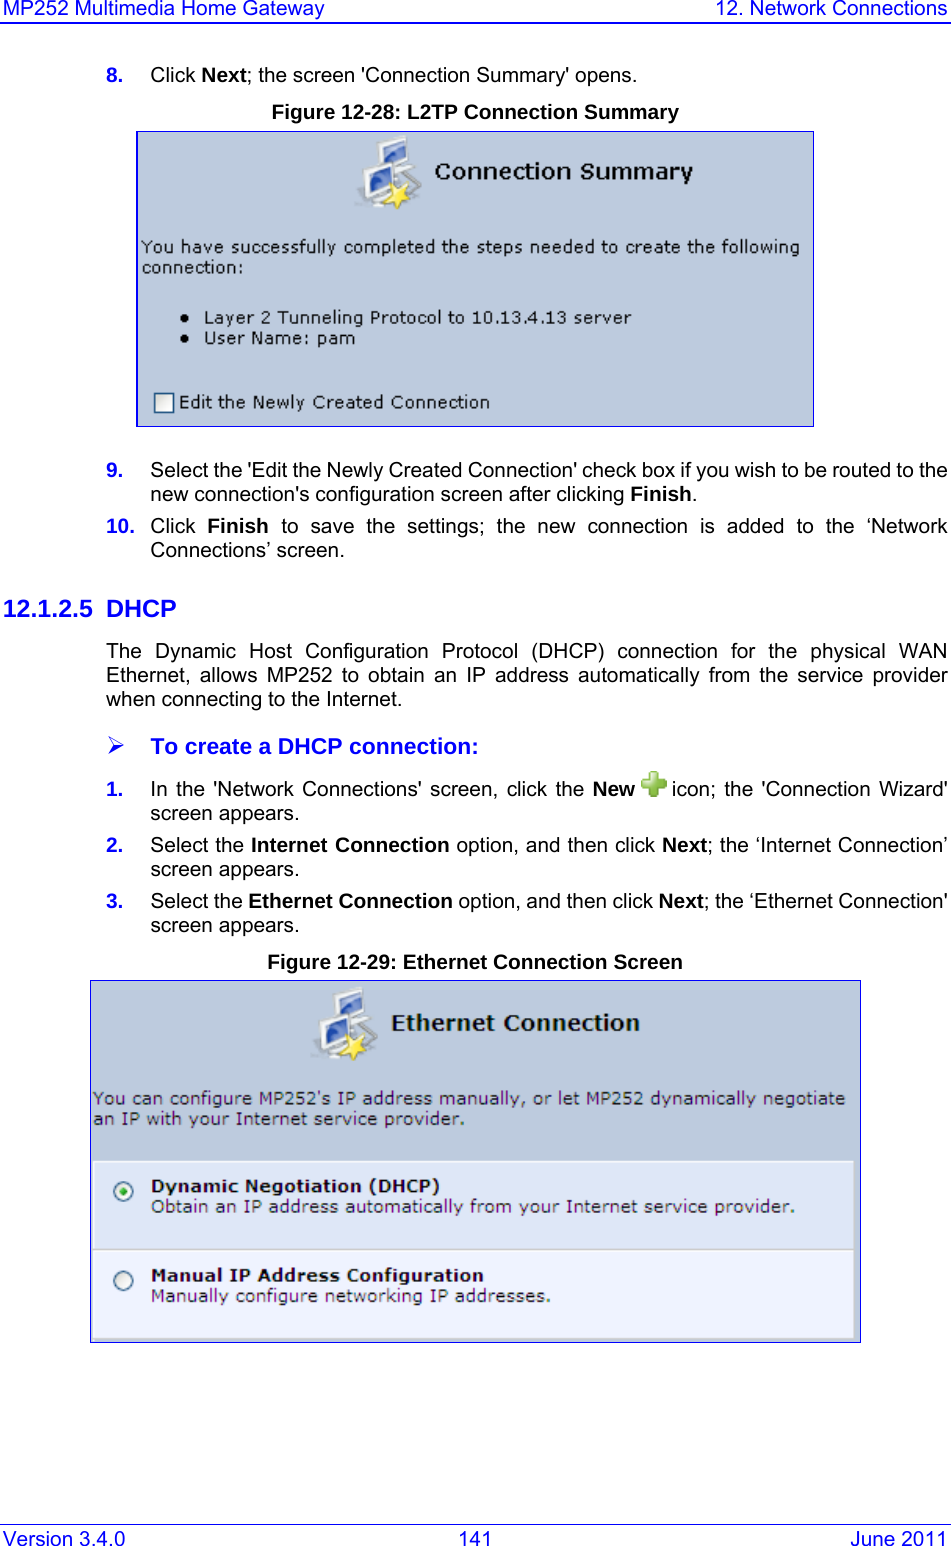 MP252 Multimedia Home Gateway  12. Network Connections Version 3.4.0  141  June 2011 8.  Click Next; the screen &apos;Connection Summary&apos; opens. Figure 12-28: L2TP Connection Summary  9.  Select the &apos;Edit the Newly Created Connection&apos; check box if you wish to be routed to the new connection&apos;s configuration screen after clicking Finish. 10.  Click  Finish  to save the settings; the new connection is added to the ‘Network Connections’ screen. 12.1.2.5 DHCP The Dynamic Host Configuration Protocol (DHCP) connection for the physical WAN Ethernet, allows MP252 to obtain an IP address automatically from the service provider when connecting to the Internet. ¾ To create a DHCP connection: 1.  In the &apos;Network Connections&apos; screen, click the New   icon; the &apos;Connection Wizard&apos; screen appears. 2.  Select the Internet Connection option, and then click Next; the ‘Internet Connection’ screen appears. 3.  Select the Ethernet Connection option, and then click Next; the ‘Ethernet Connection&apos; screen appears. Figure 12-29: Ethernet Connection Screen  